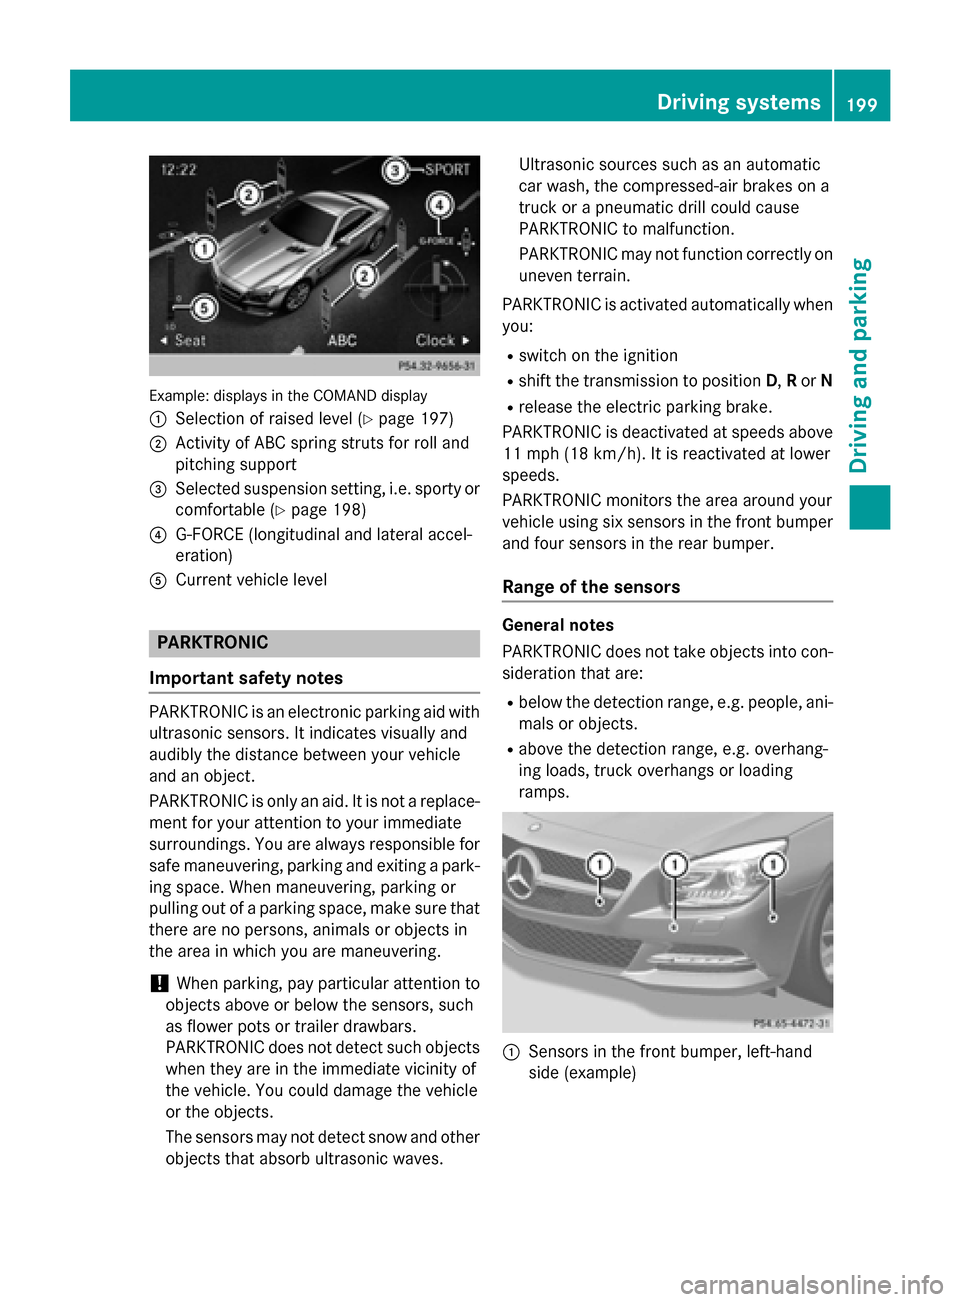 MERCEDES-BENZ SL-Class 2016 R231 User Guide Example: displays in the COMAND display
:
Selection of raised level (Ypage 197)
;Activity of ABC spring struts for roll and
pitching support
=Selected suspension setting, i.e. sporty or
comfortable (
